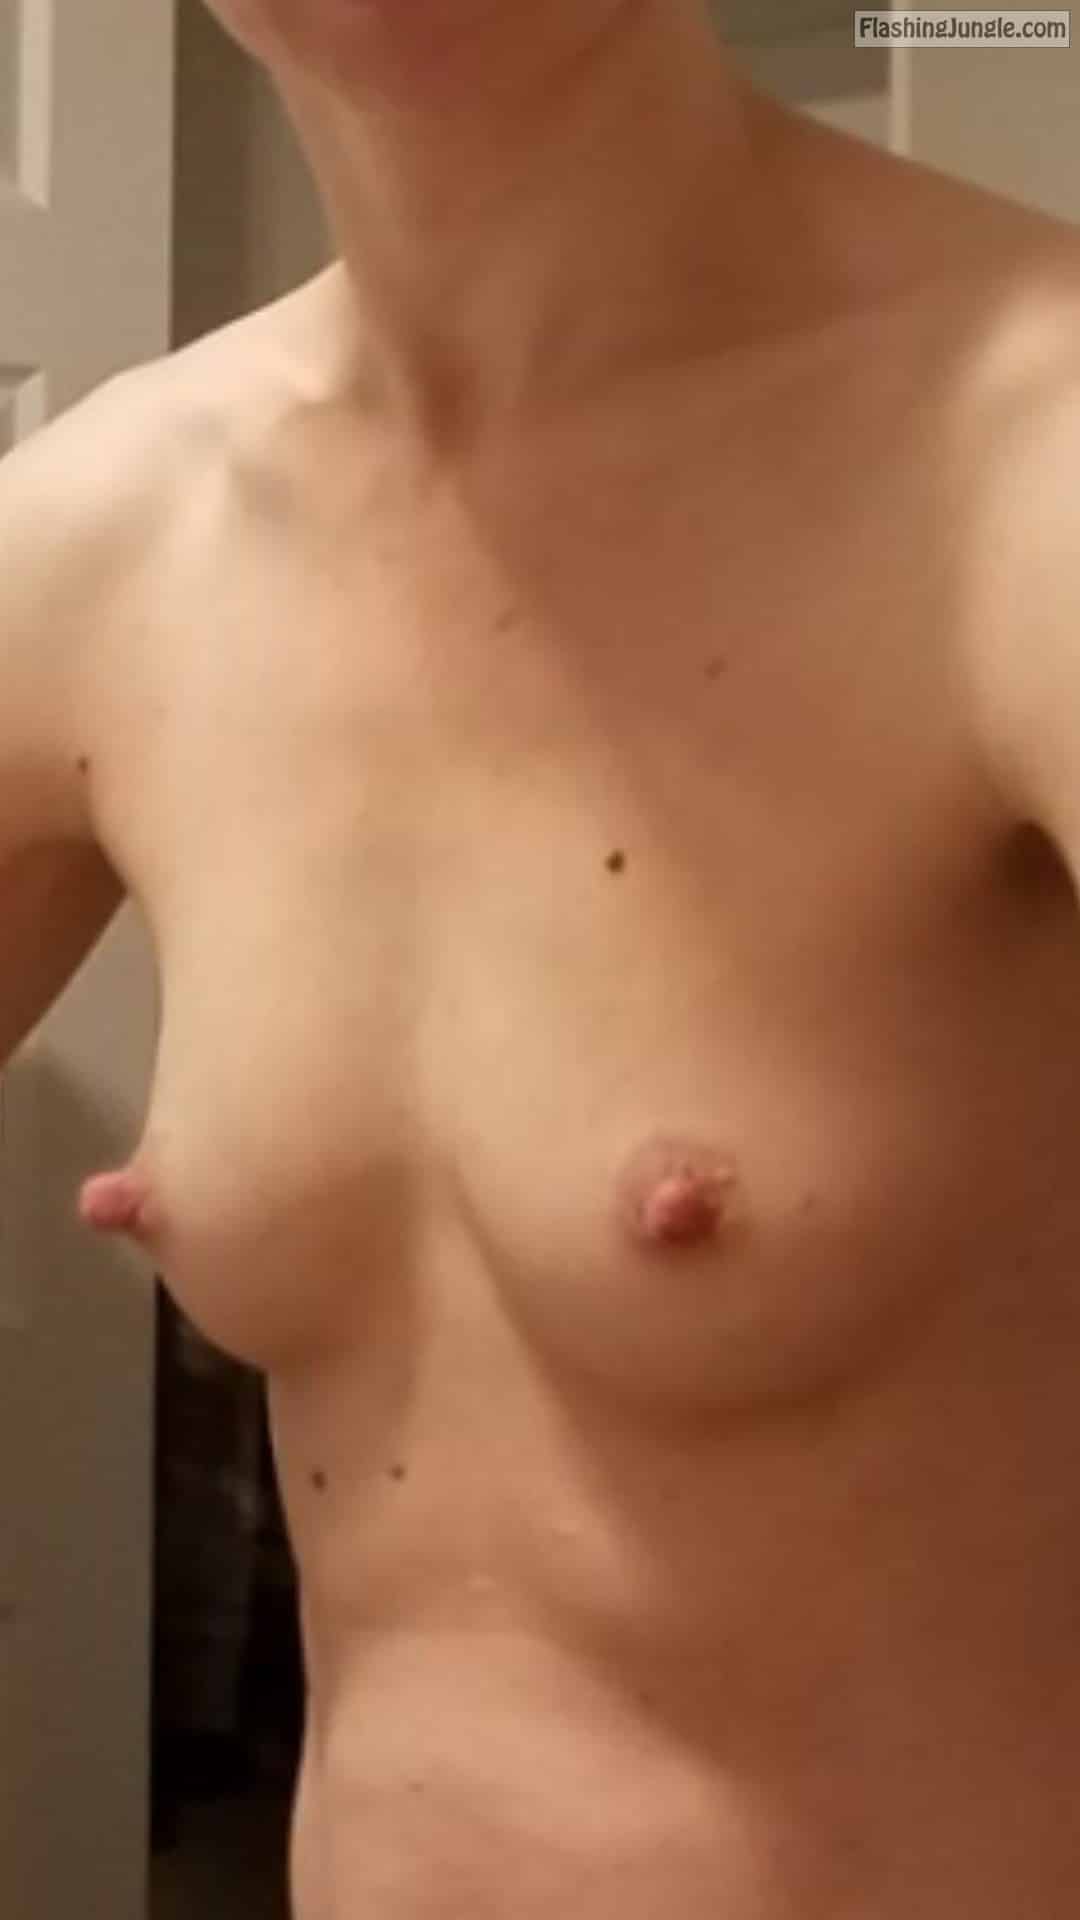 Real Amateurs Boobs Flash Pics  : Small tits hard erected nipples available for sucking